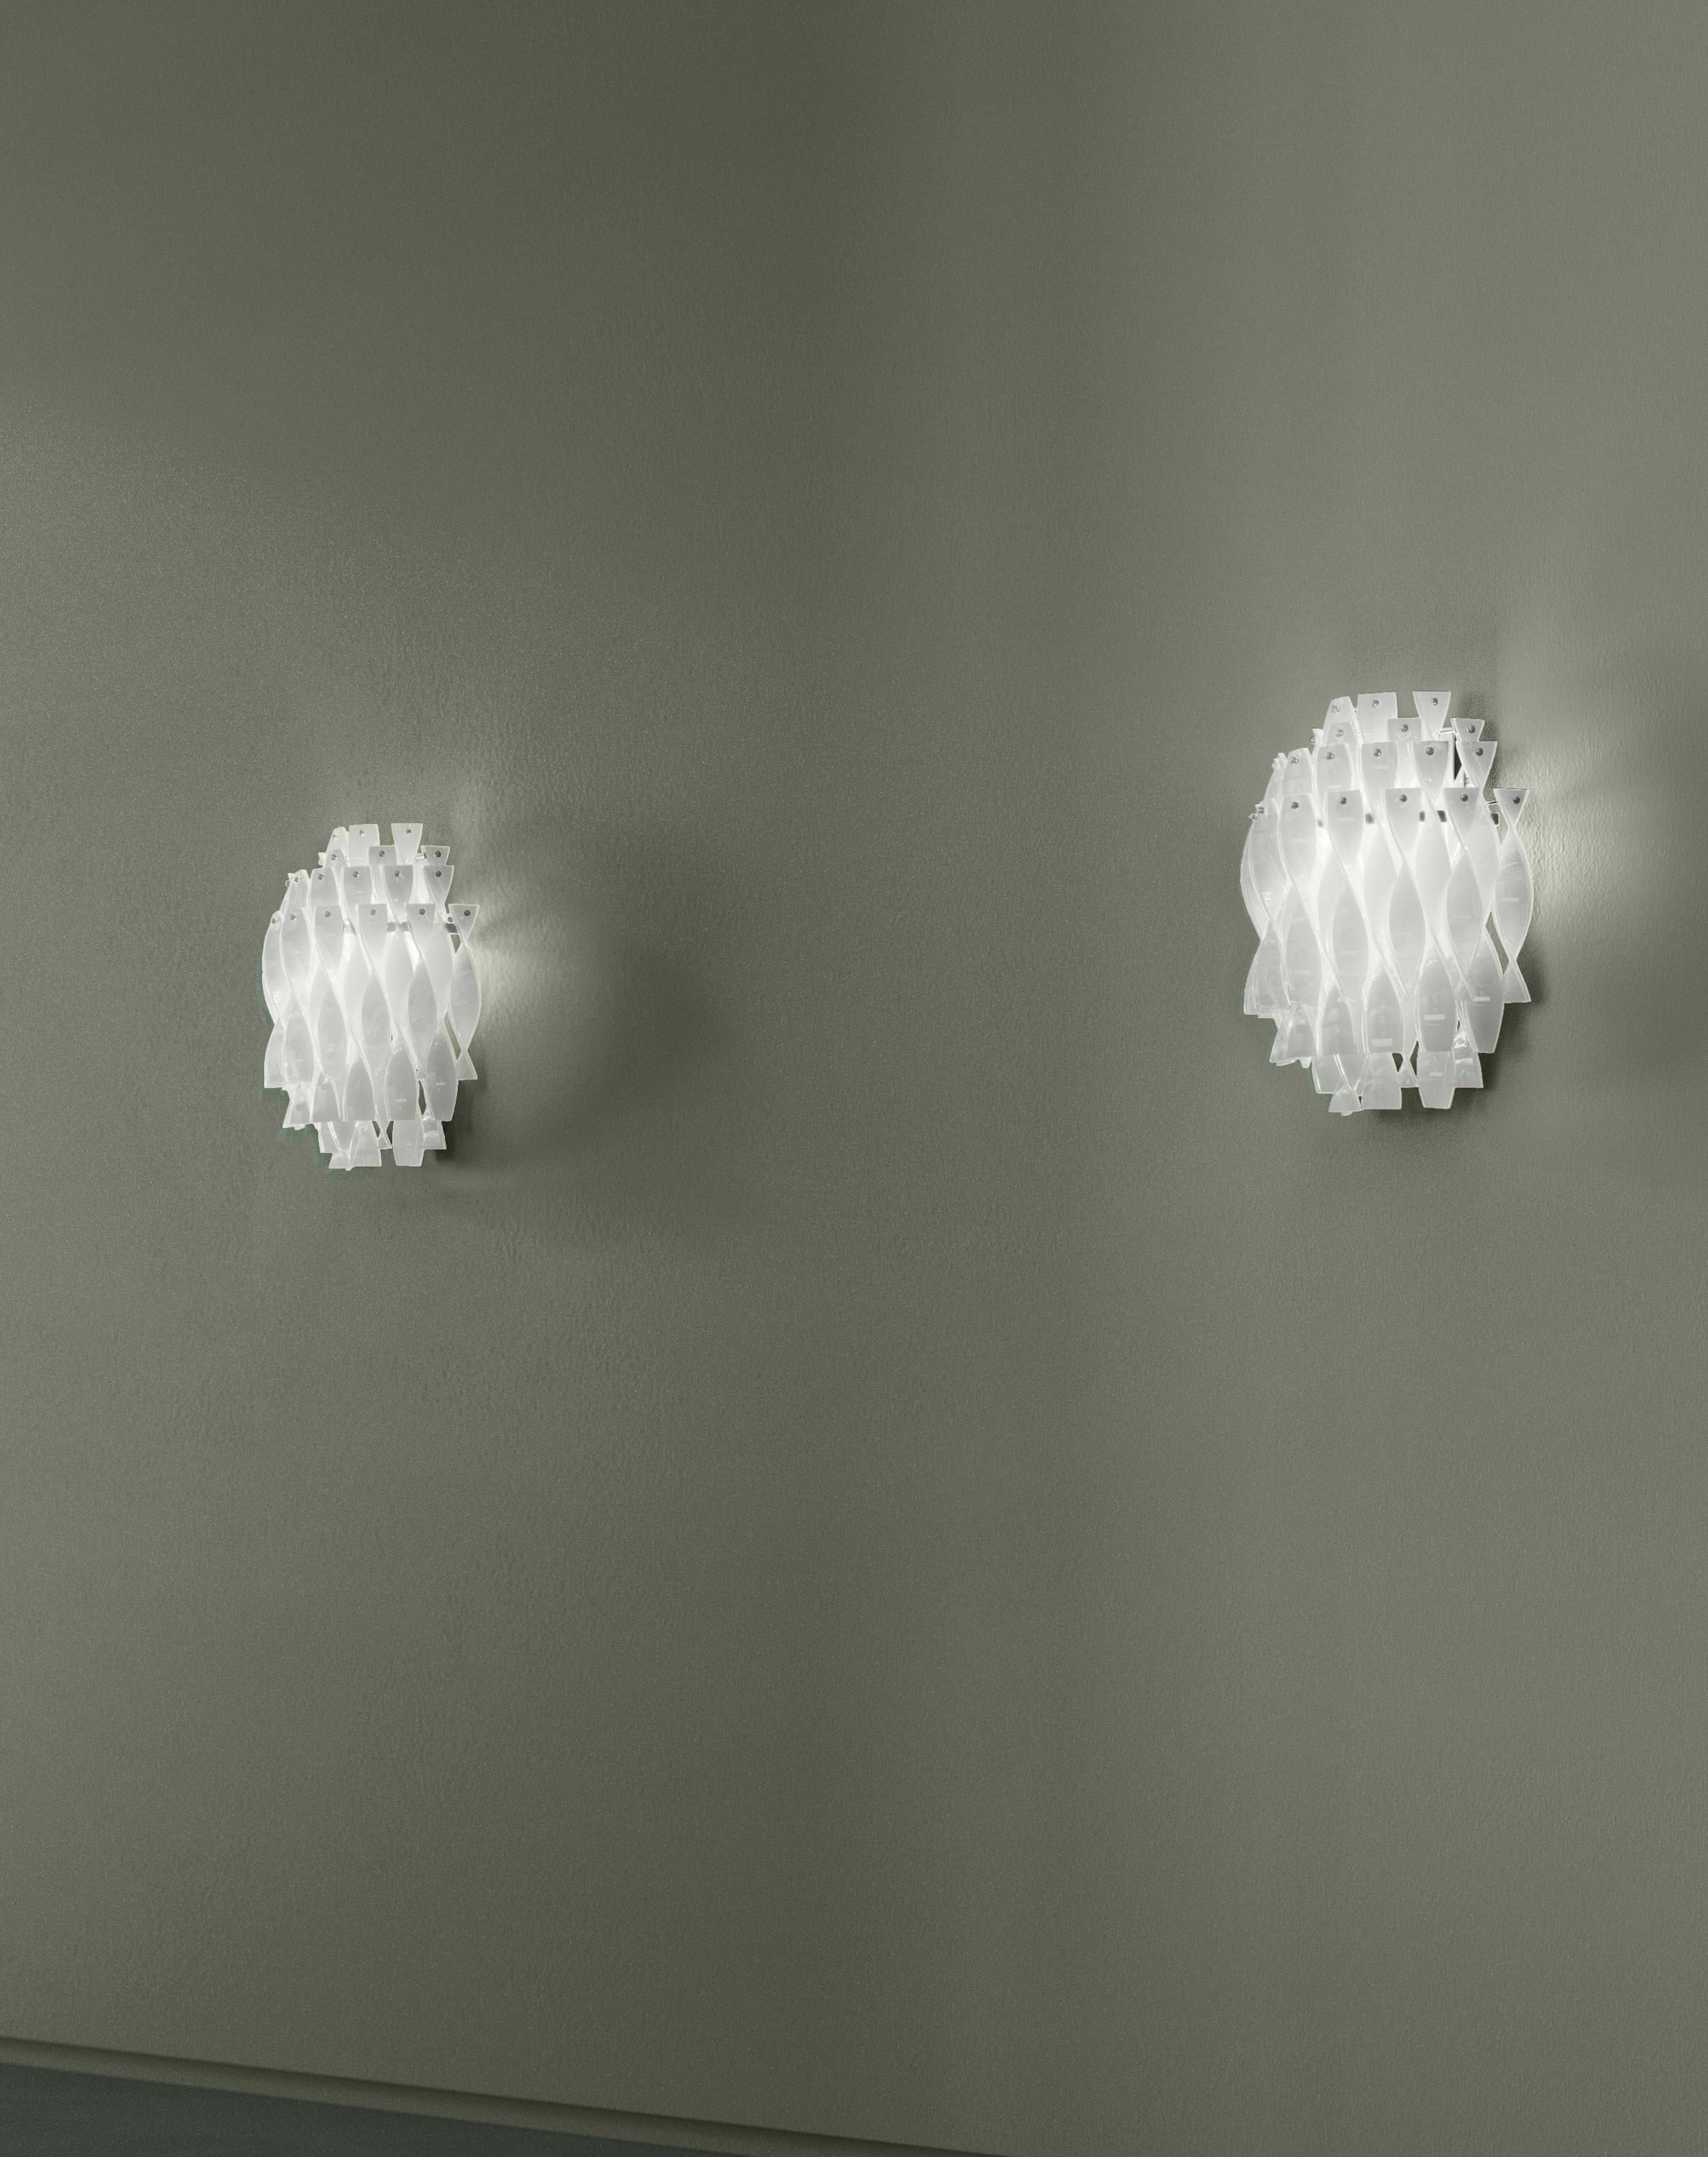 Axolight Avir Medium Wall Lamp in Chrome and White by Manuel & Vanessa Vivian In New Condition For Sale In Brooklyn, NY